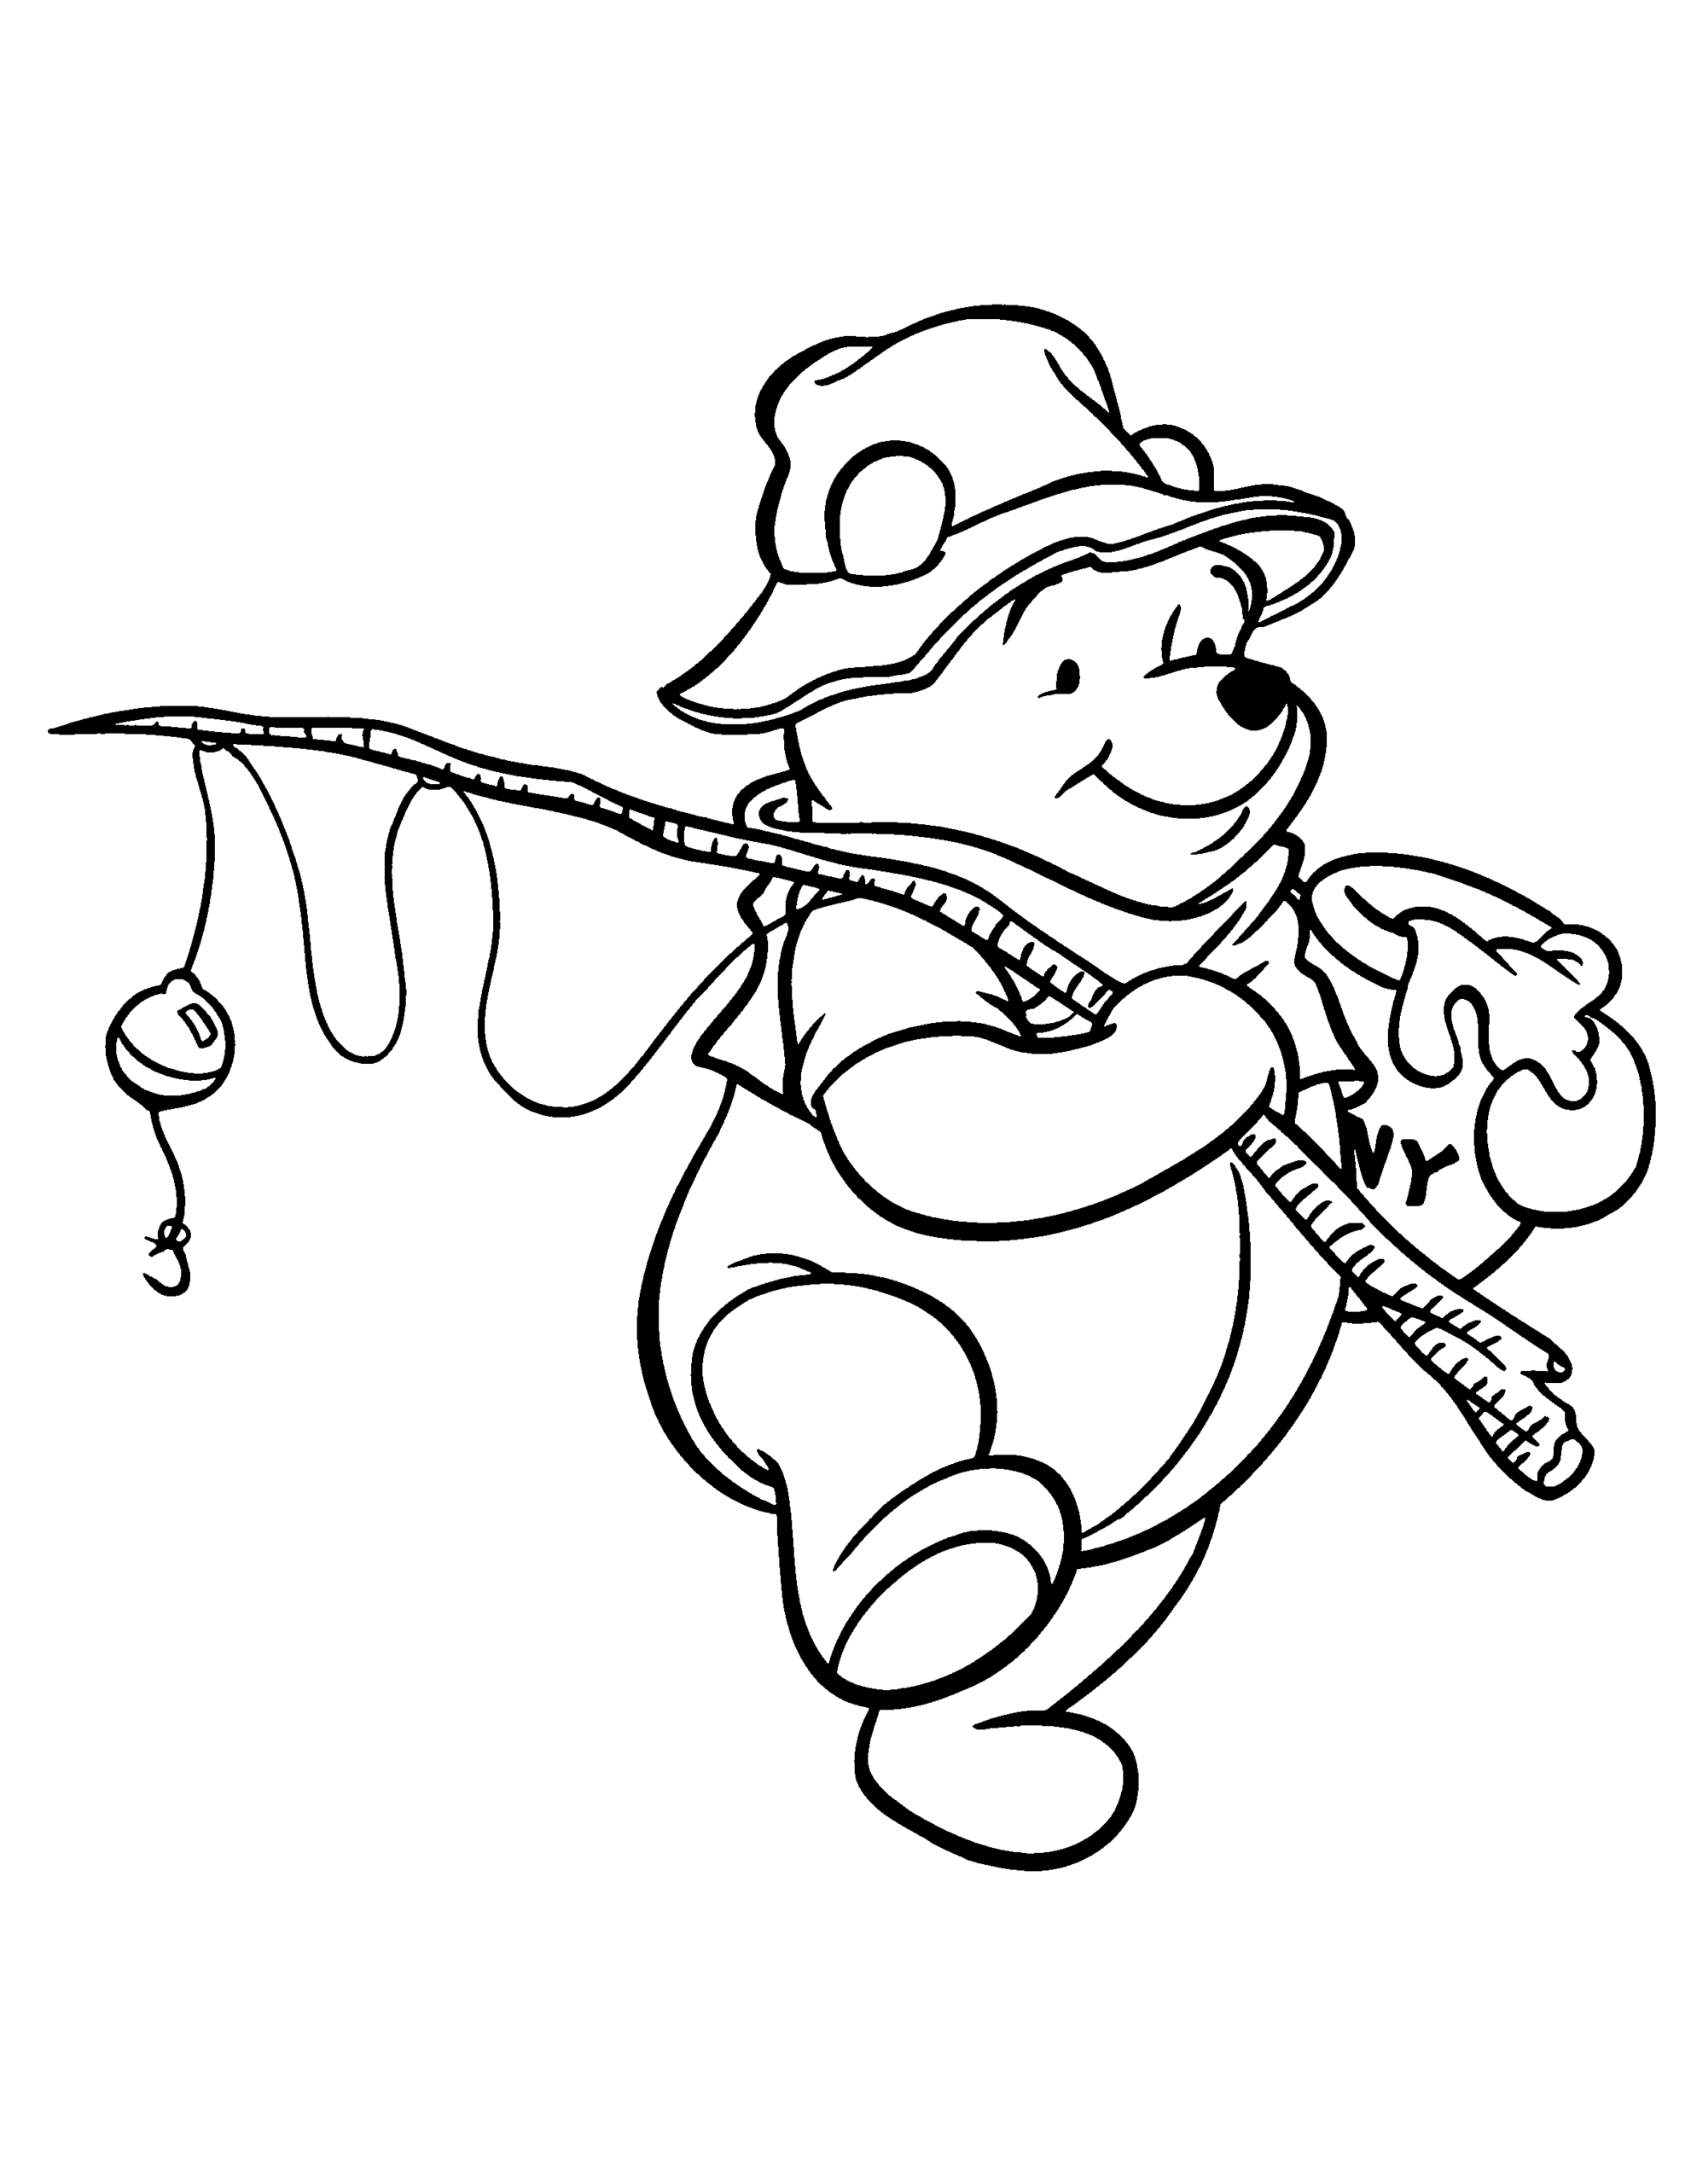 Winnie the Pooh Coloring Pages Cartoons winnie the pooh 67 Printable 2020 7184 Coloring4free